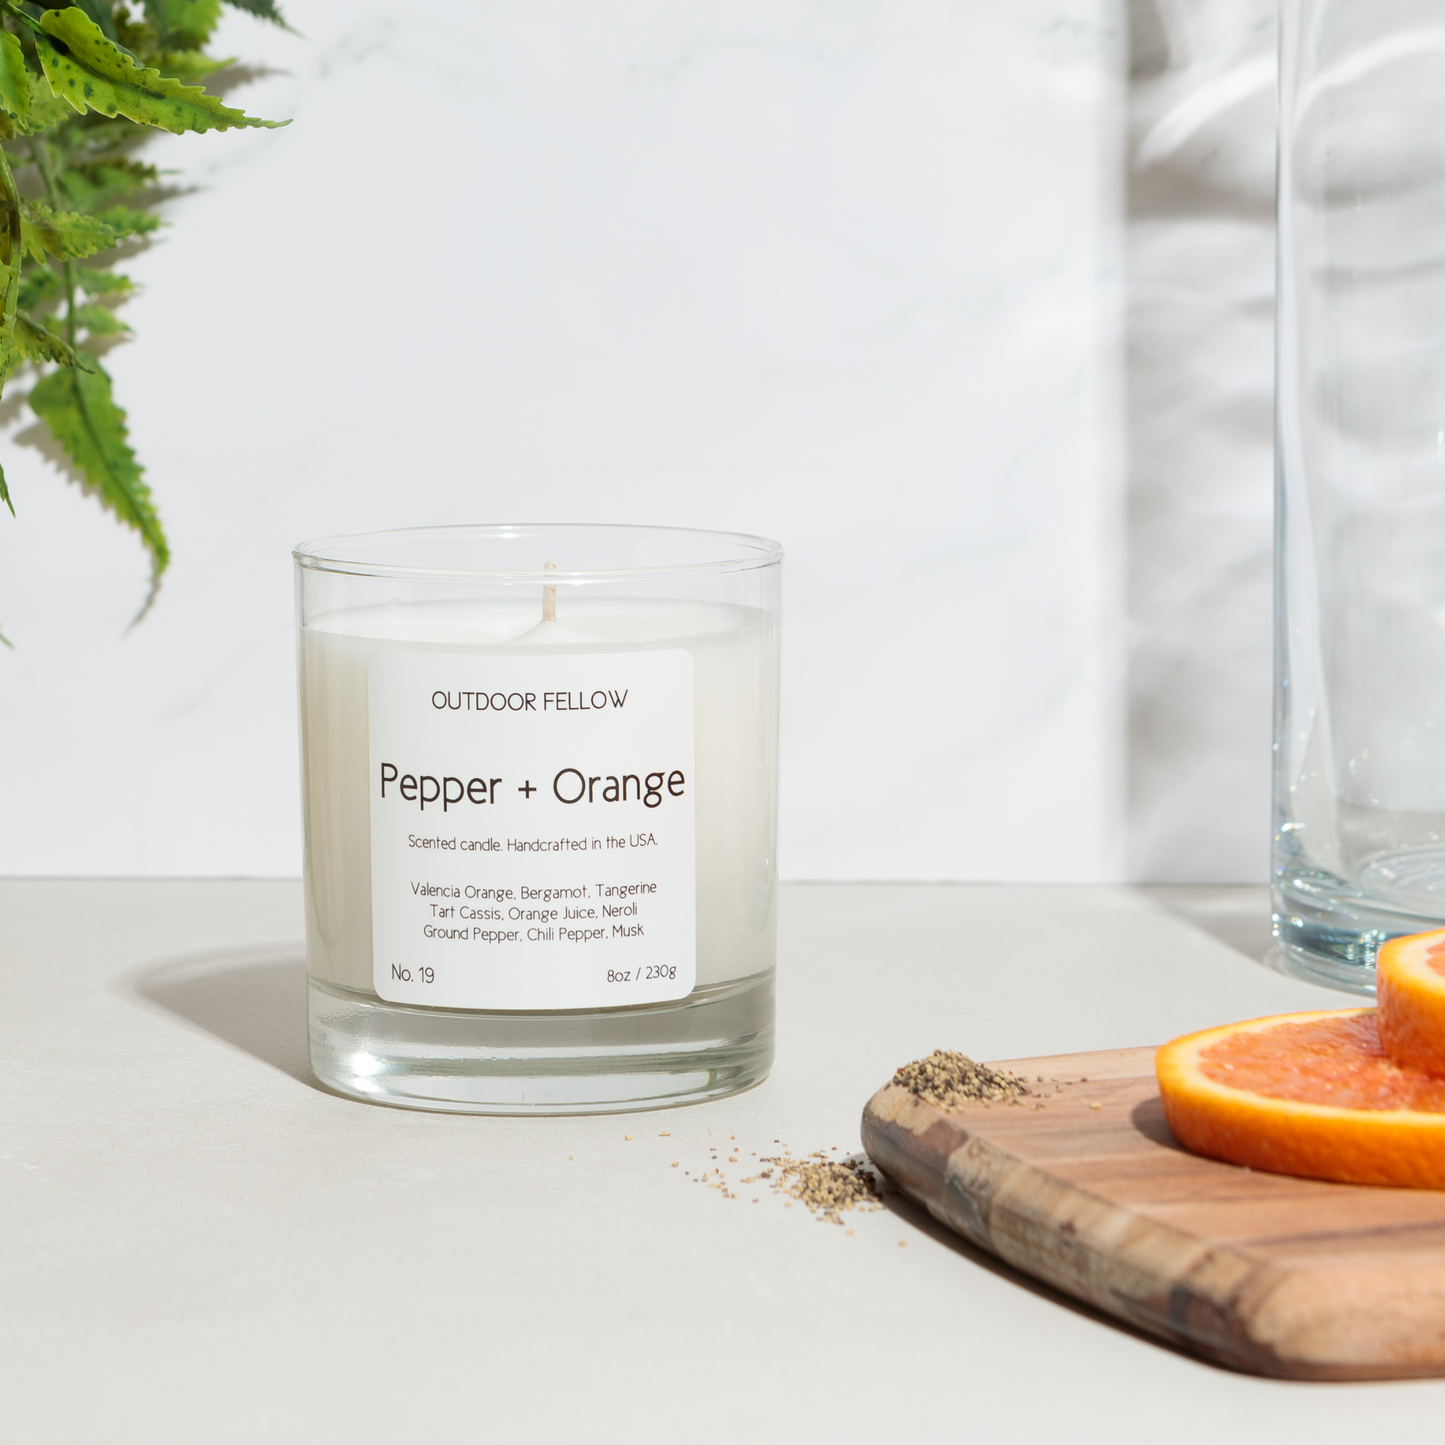 Pepper and Orange scented candle next to orange slices and ground pepper on cutting board